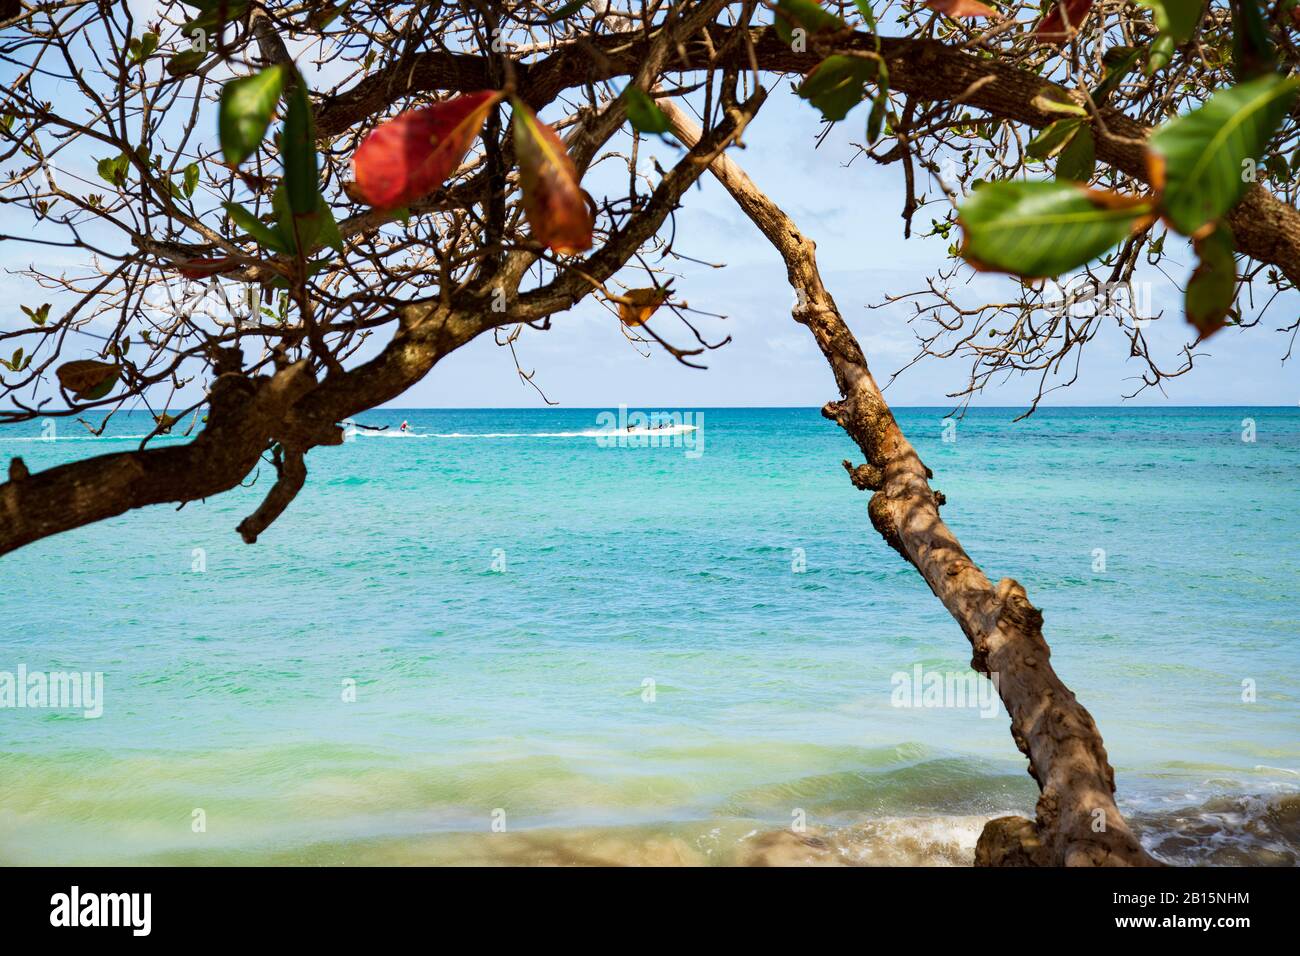 Beautiful blue sea water and almond tree branches with a few dark orange and green leaves and a speed boat and wave surfer faintly visible in the dist Stock Photo